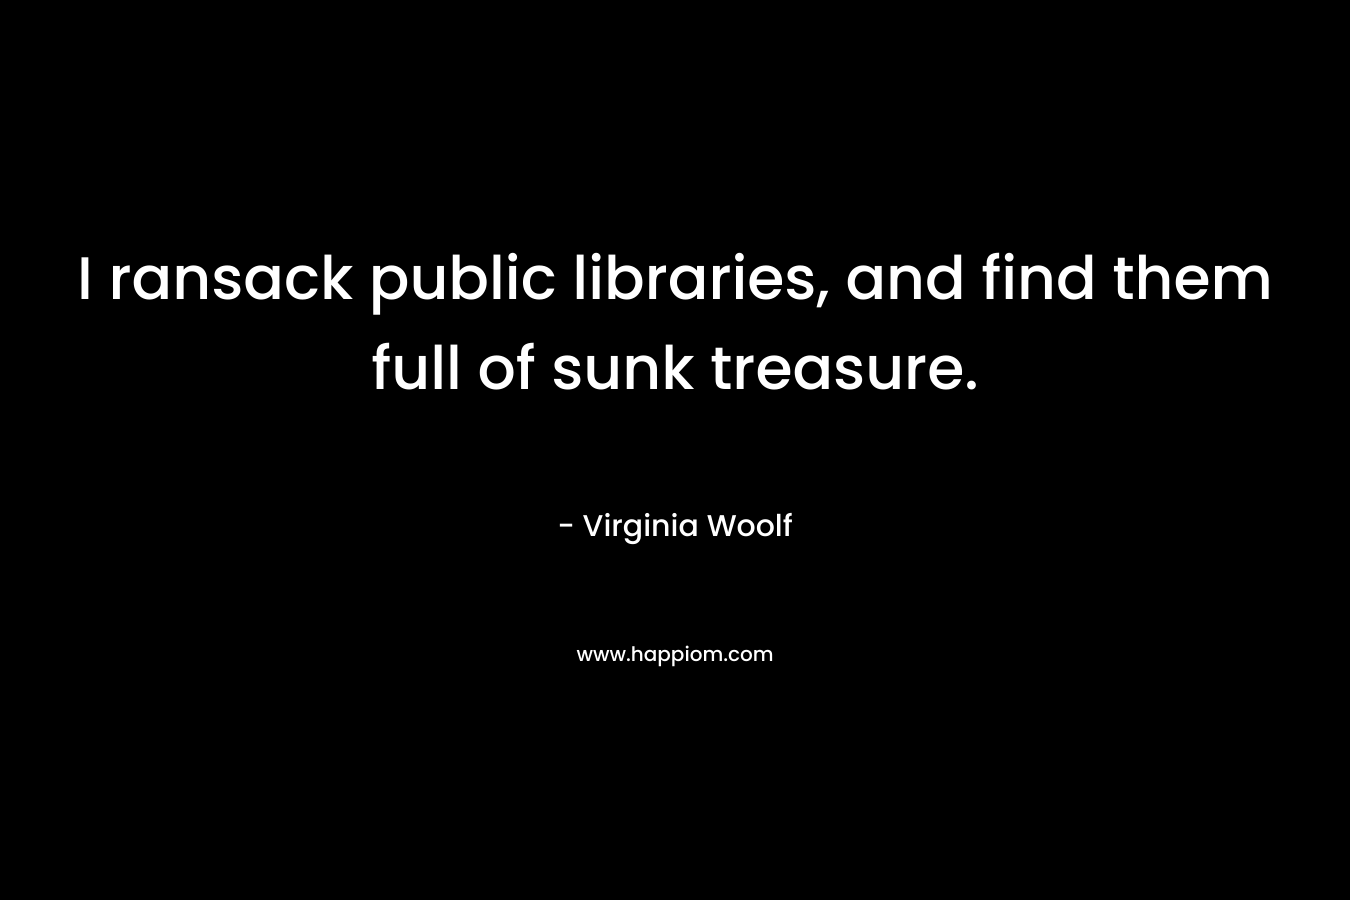 I ransack public libraries, and find them full of sunk treasure. – Virginia Woolf